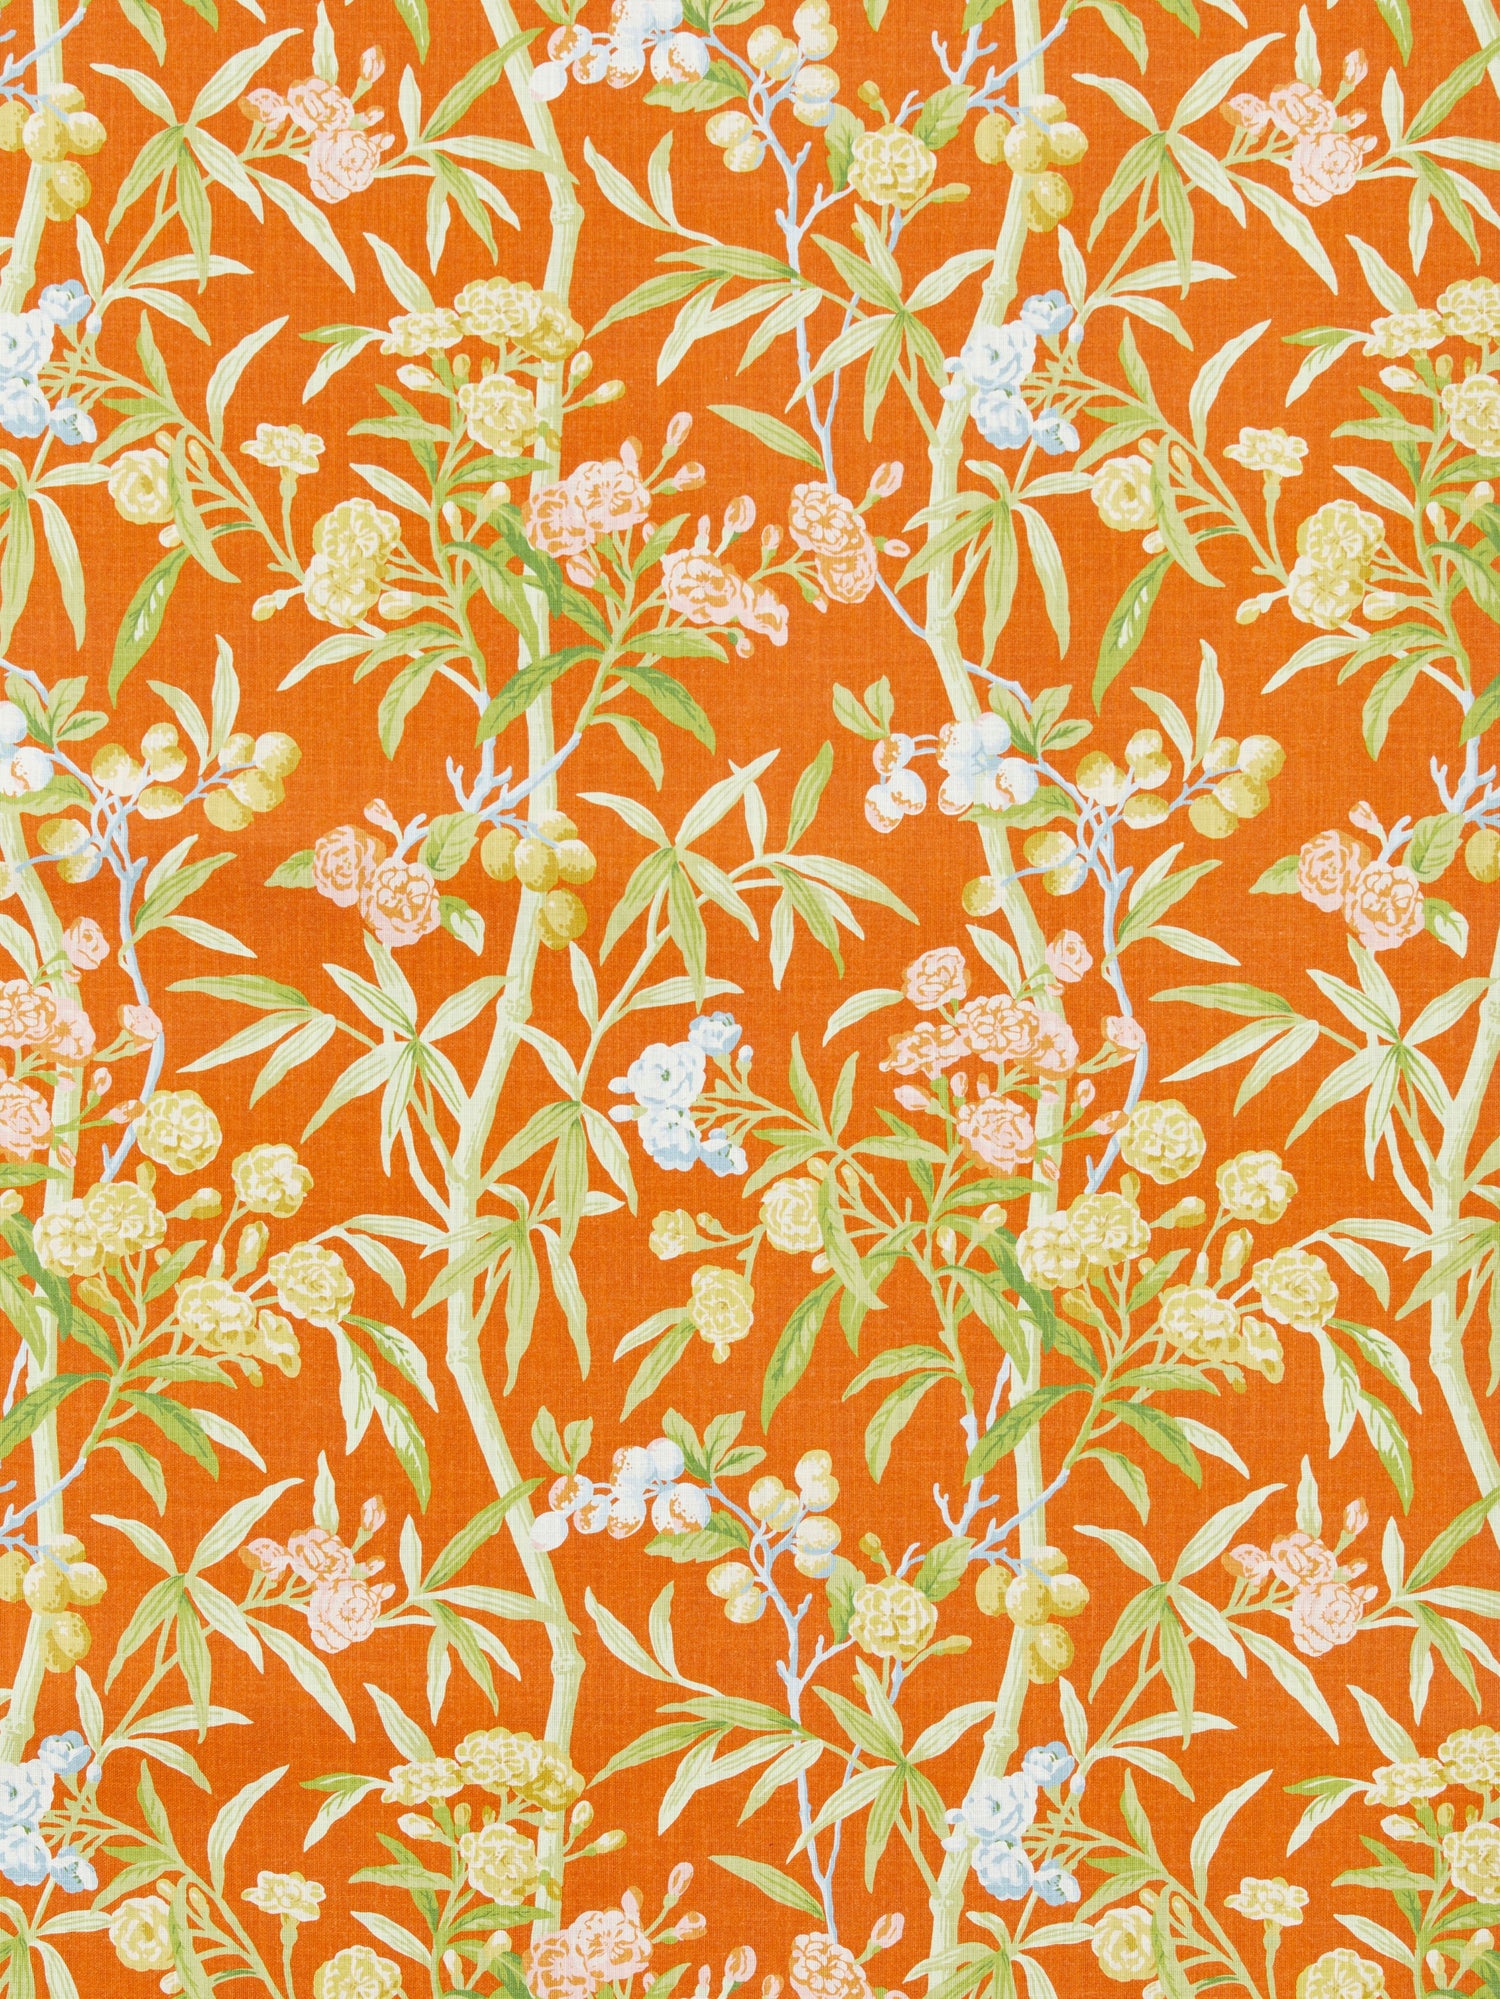 Lanai Outdoor fabric in guava color - pattern number SC 000316638 - by Scalamandre in the Scalamandre Fabrics Book 1 collection